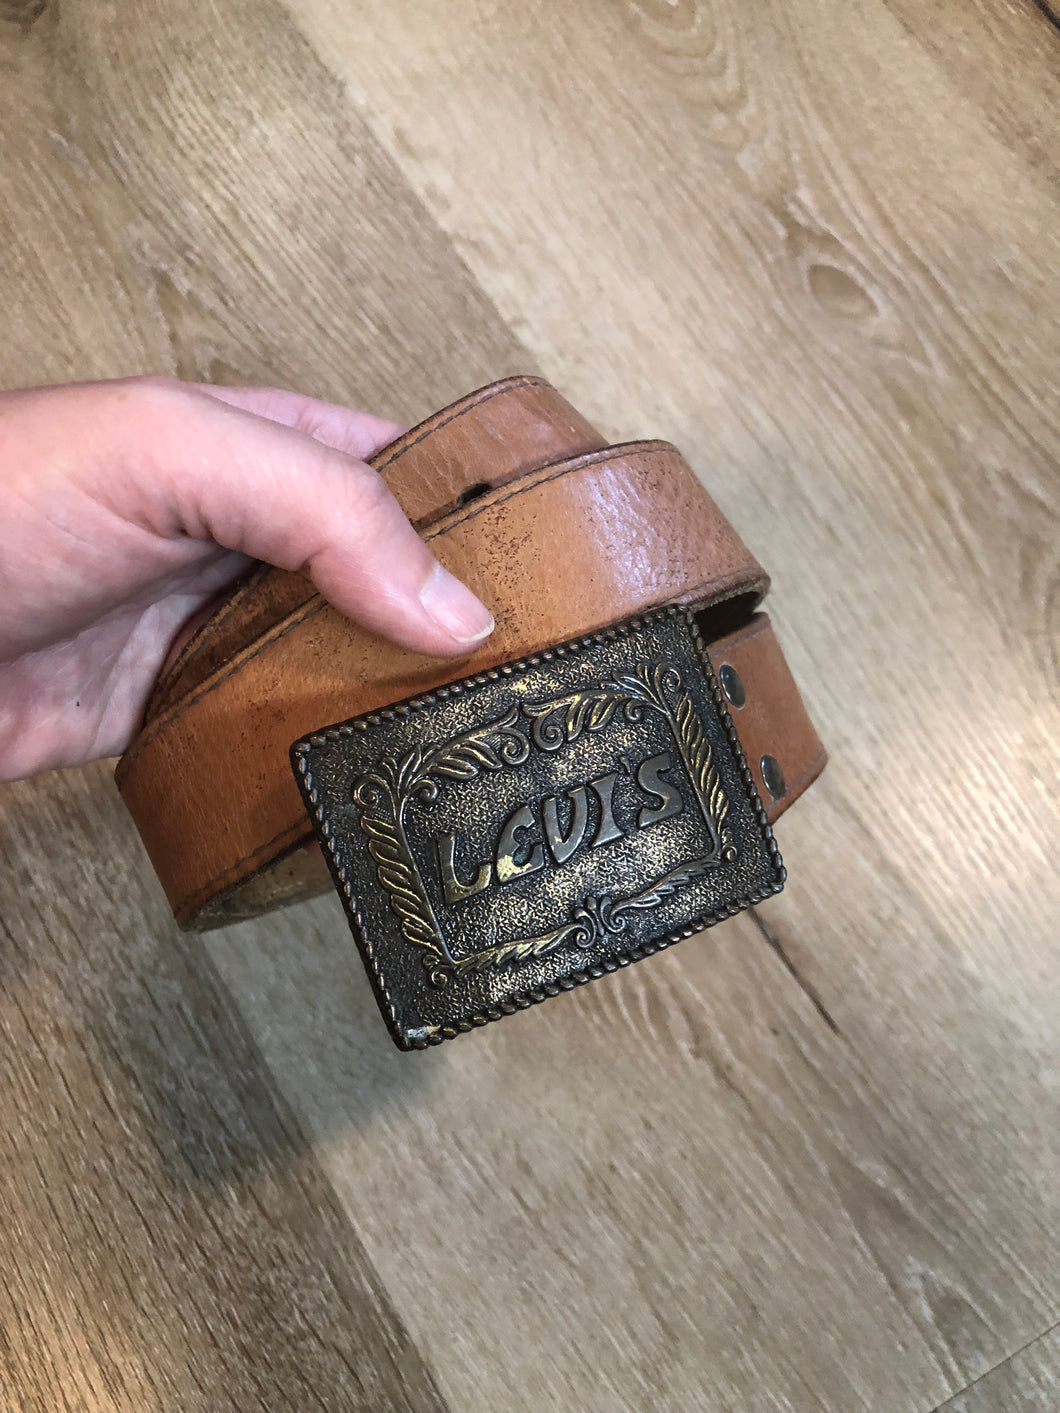 Vintage Levi's Leather Belt with Century Canada Buckle, Made in